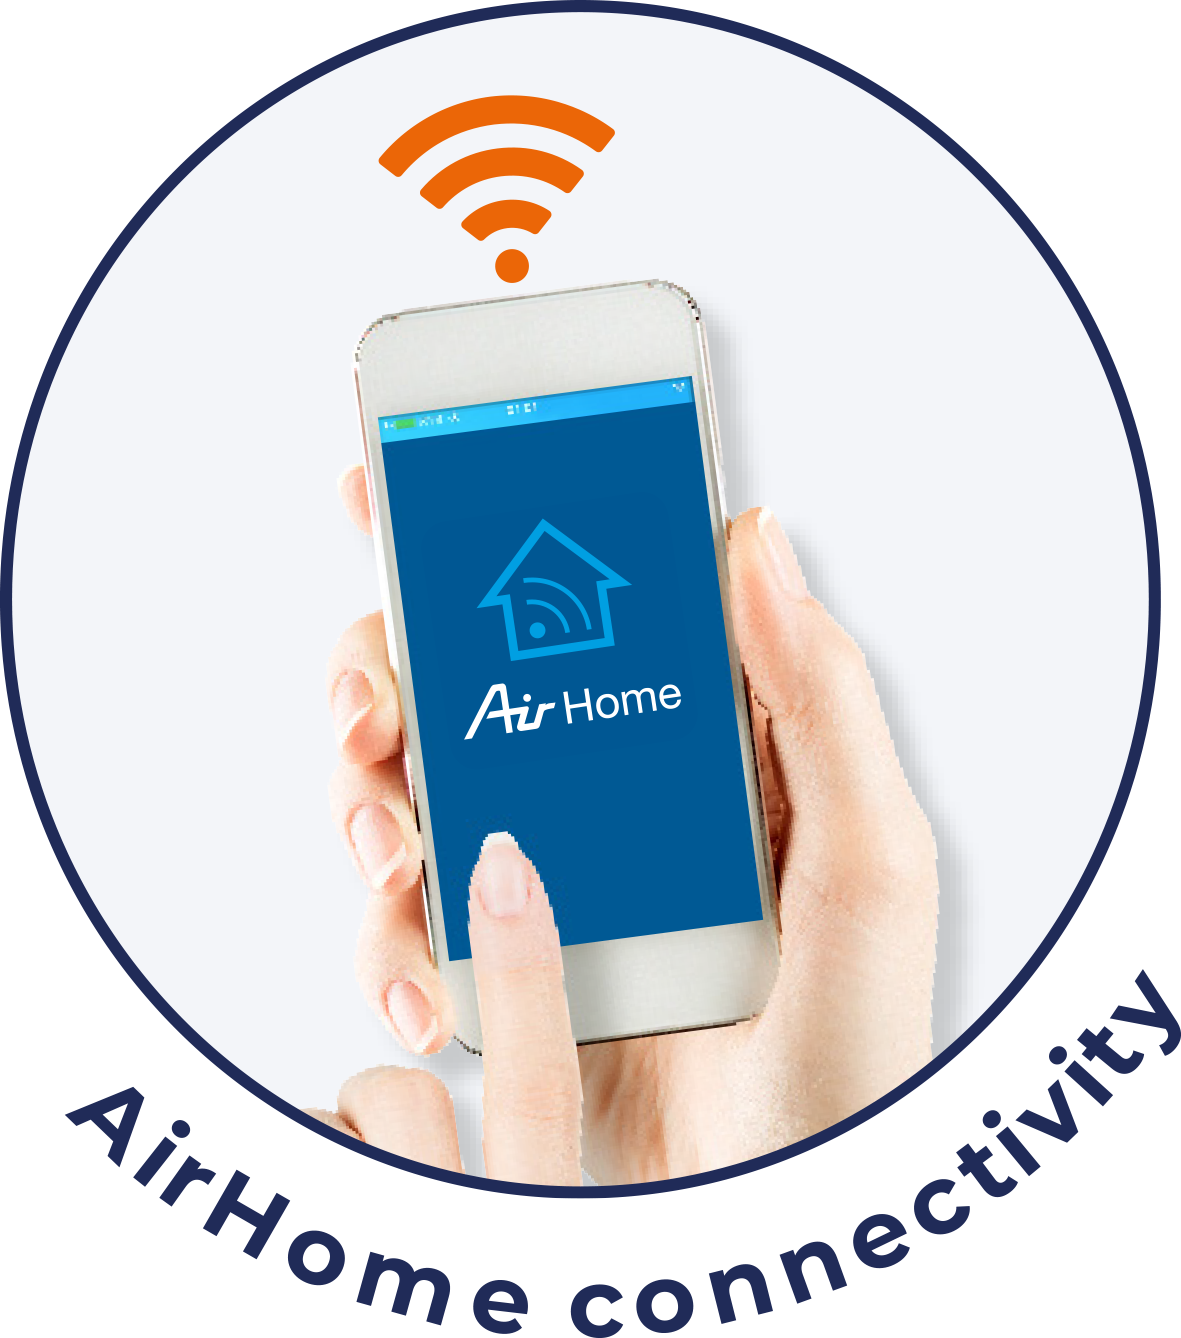 Compatible application AirHome